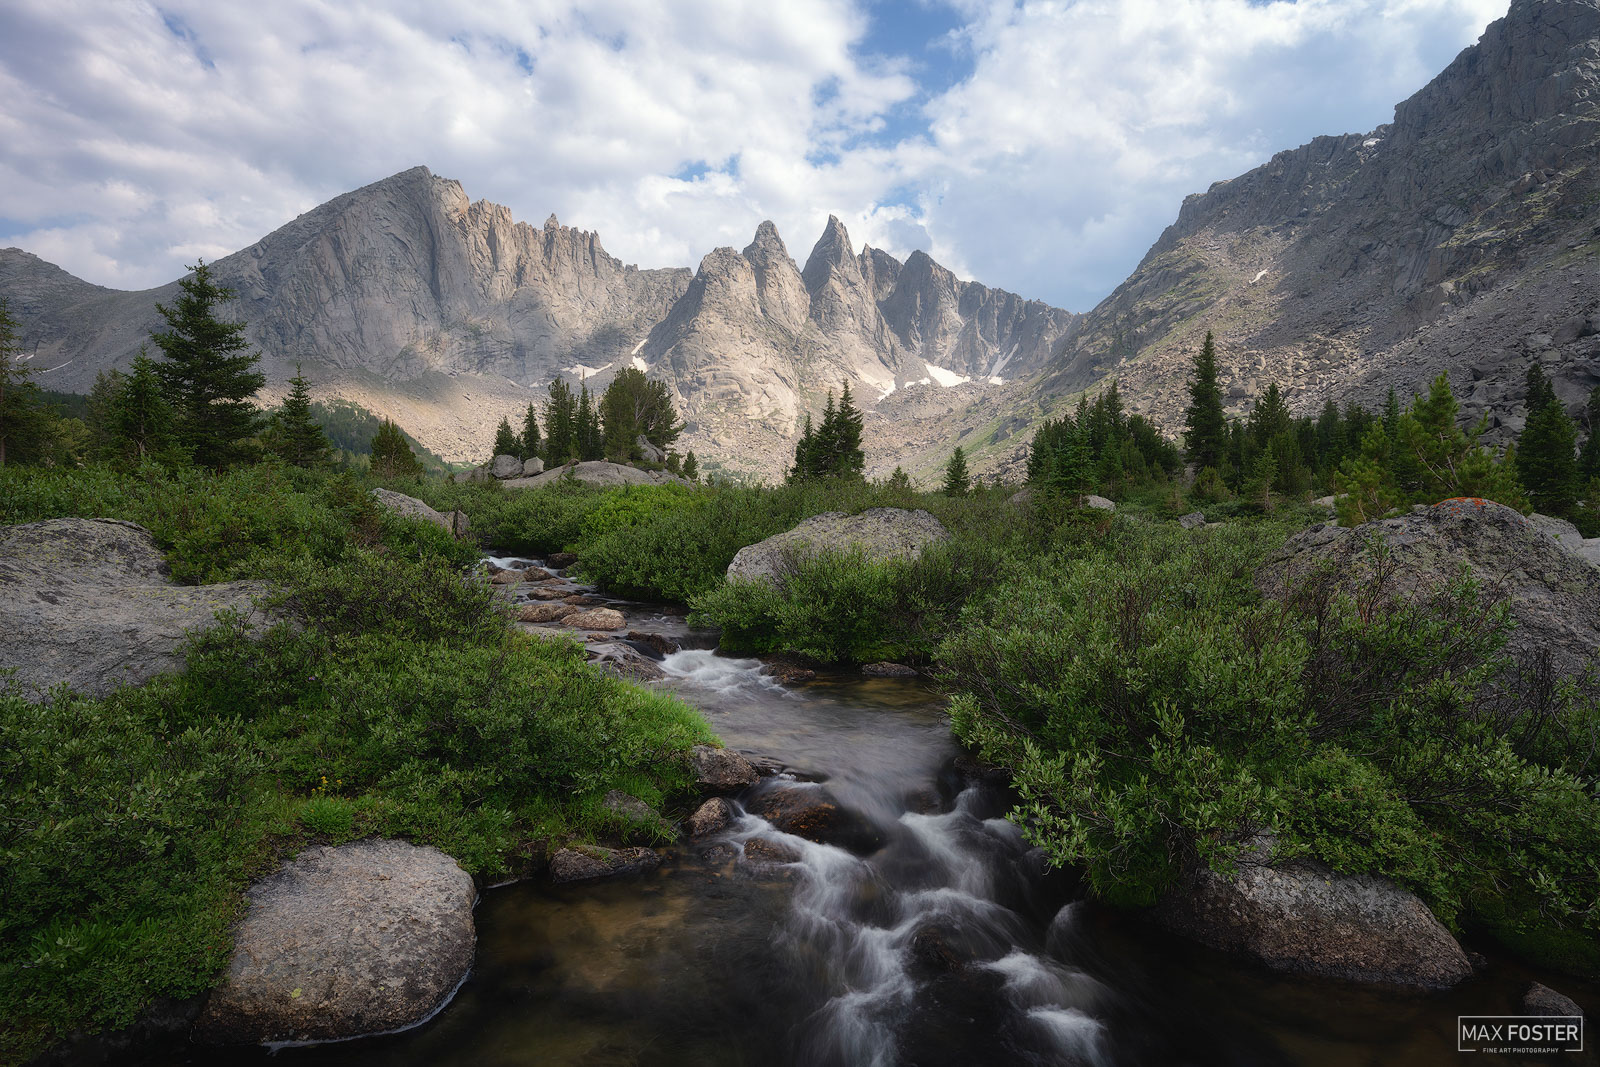 Breathe new life into your home with Call Of The Wild, Max Foster's limited edition photography print of the Wind River Range...